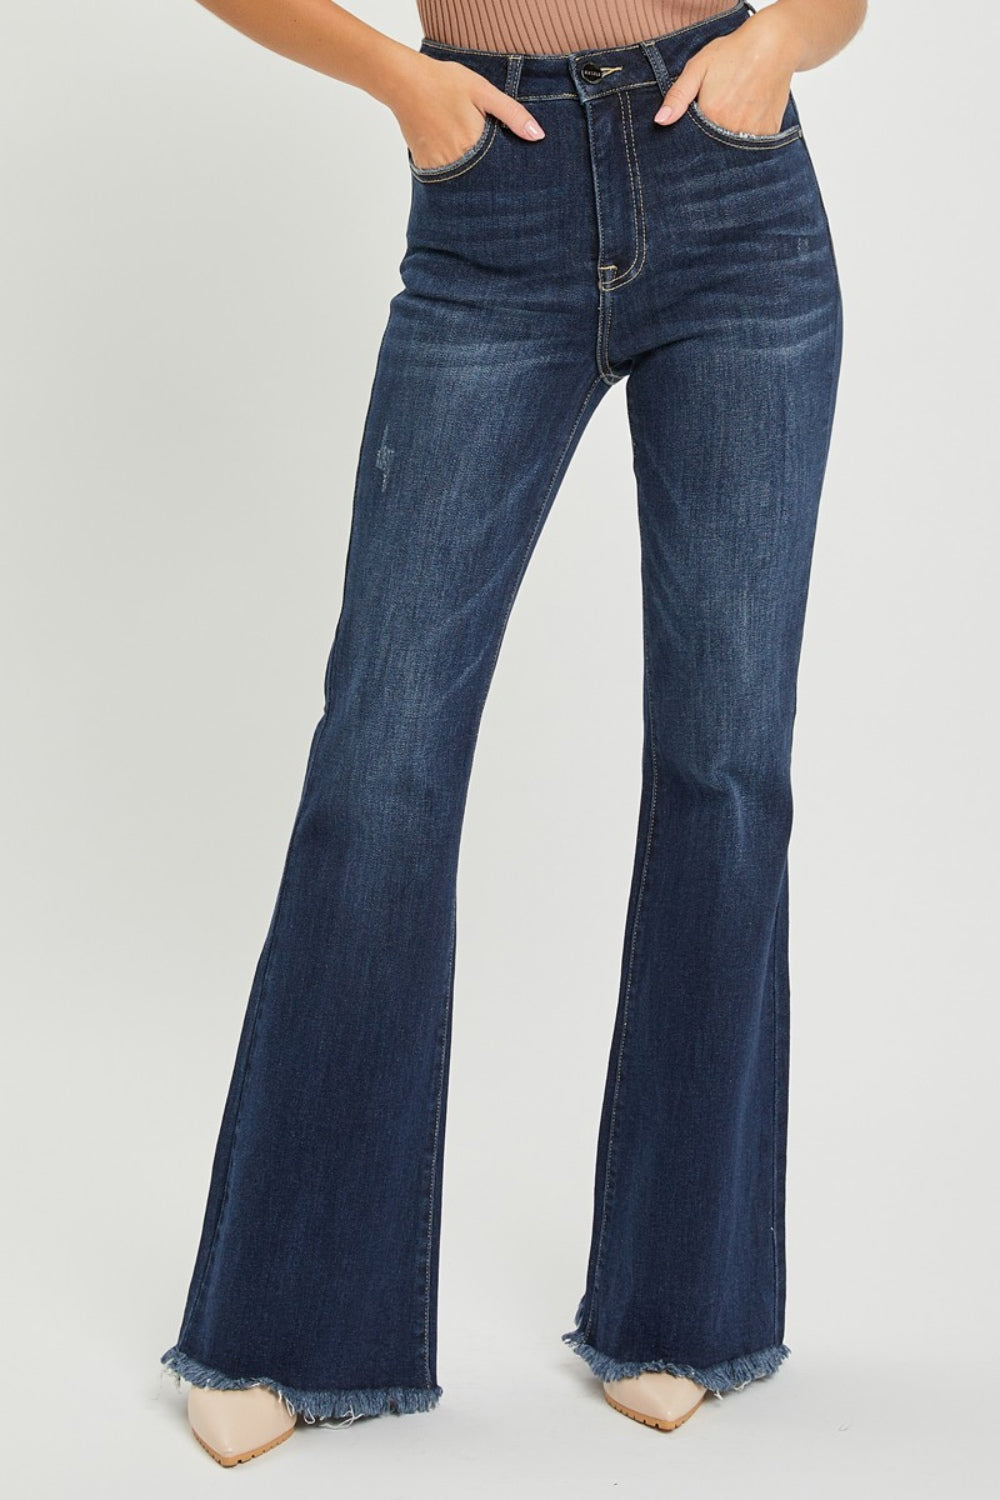 RISEN Jeans  Inspired Eye Boutique